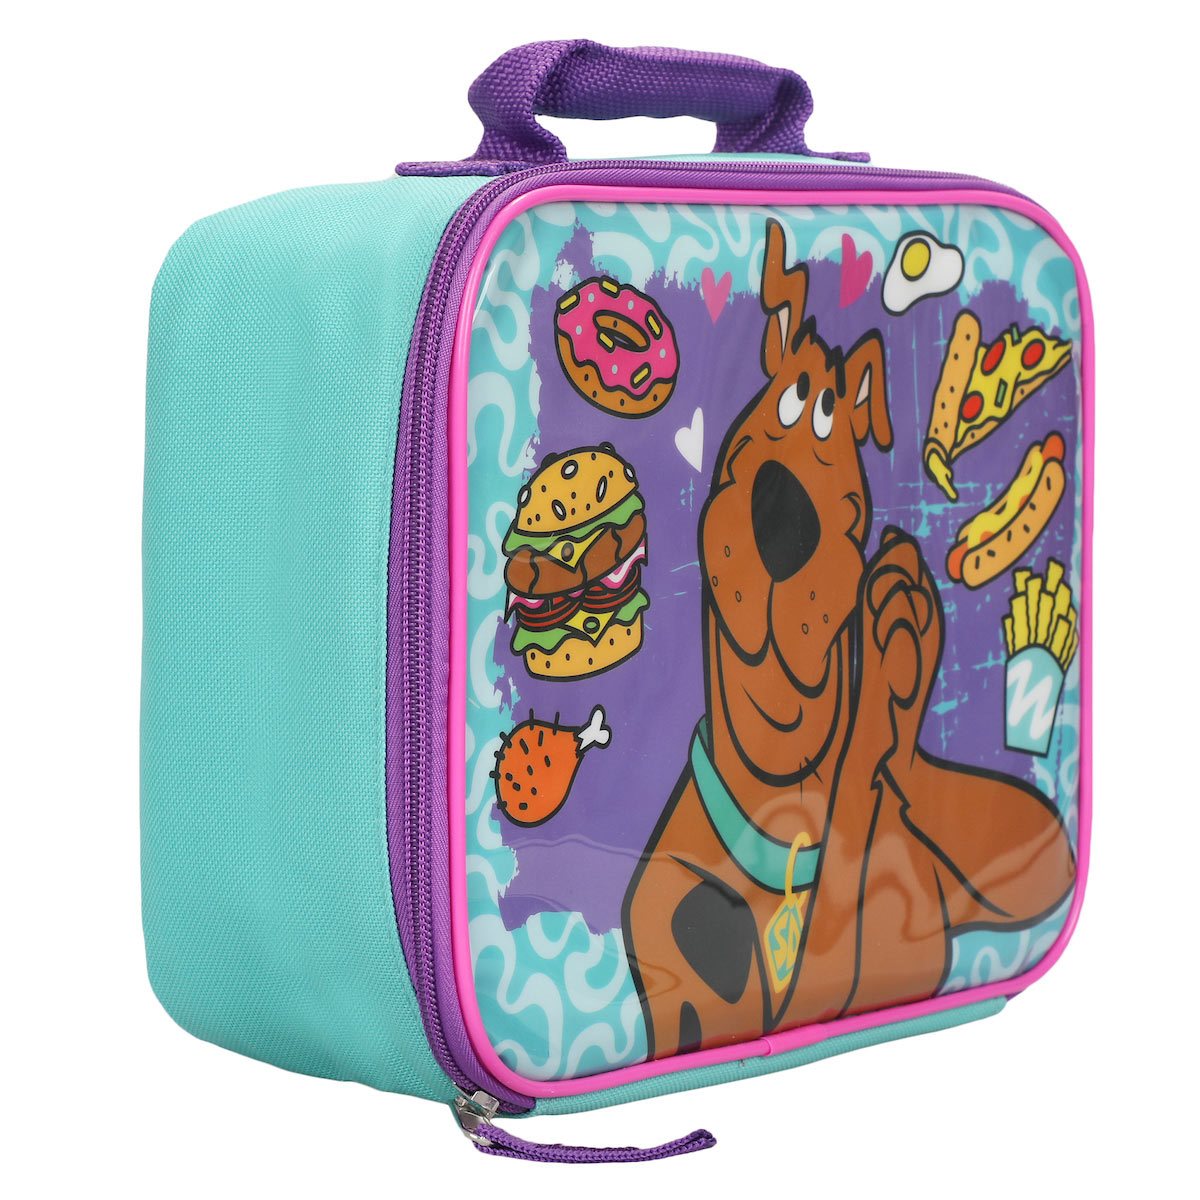 Naruto Lunch Box Anime Manga Insulated Dual Compartment Kids Lunch Bag Tote  Multicoloured